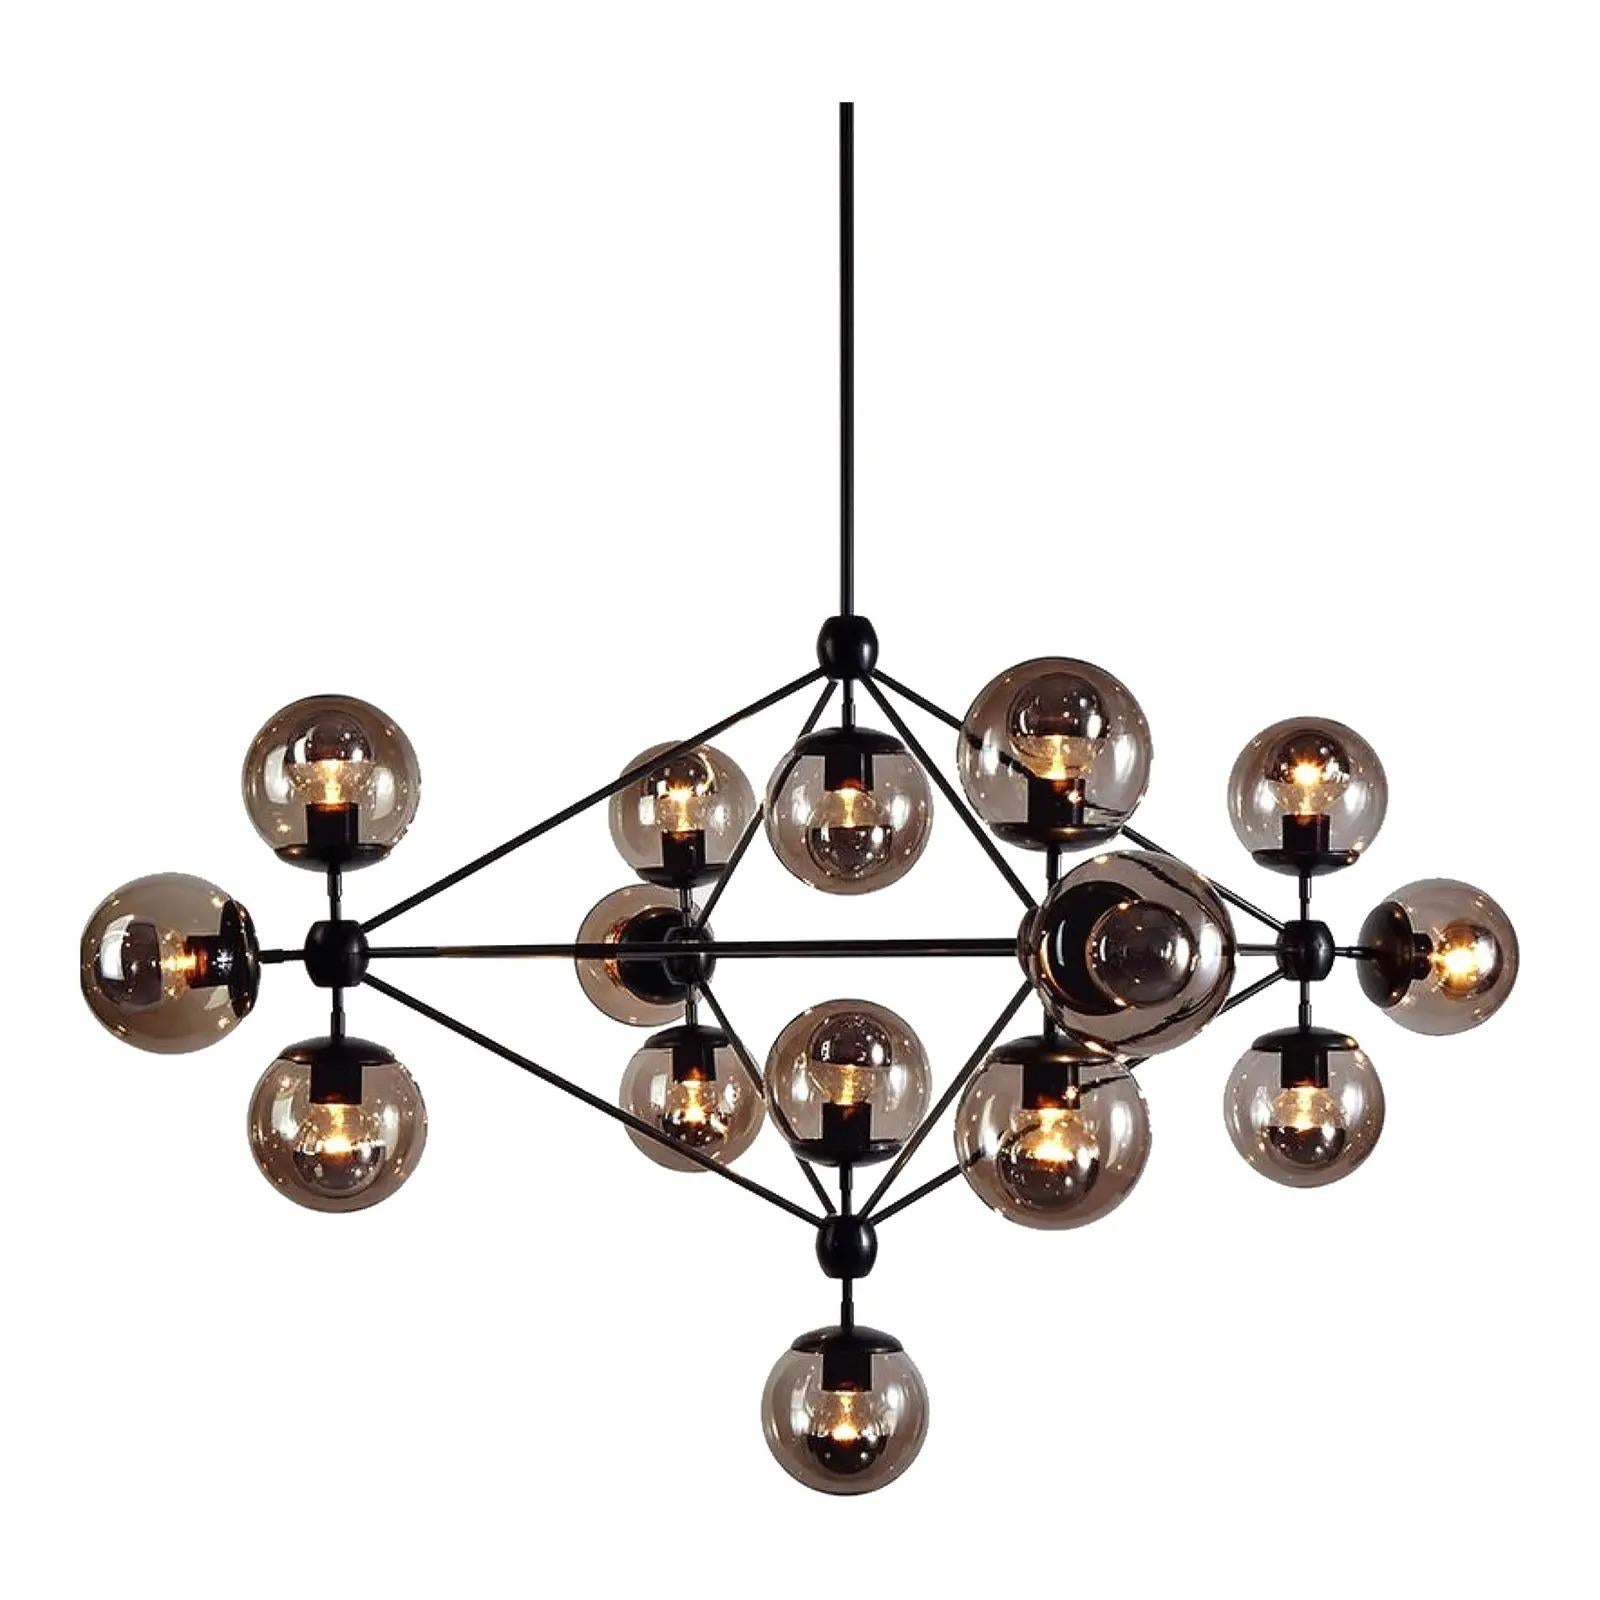 A fantastic Contemporary roll and hill chandelier. The iconic Modo Diamond 13 globe design. Beautiful tinted hand blown globes on a geometric machines aluminum frame. Absolutely striking. Acquired from a Miami estate.